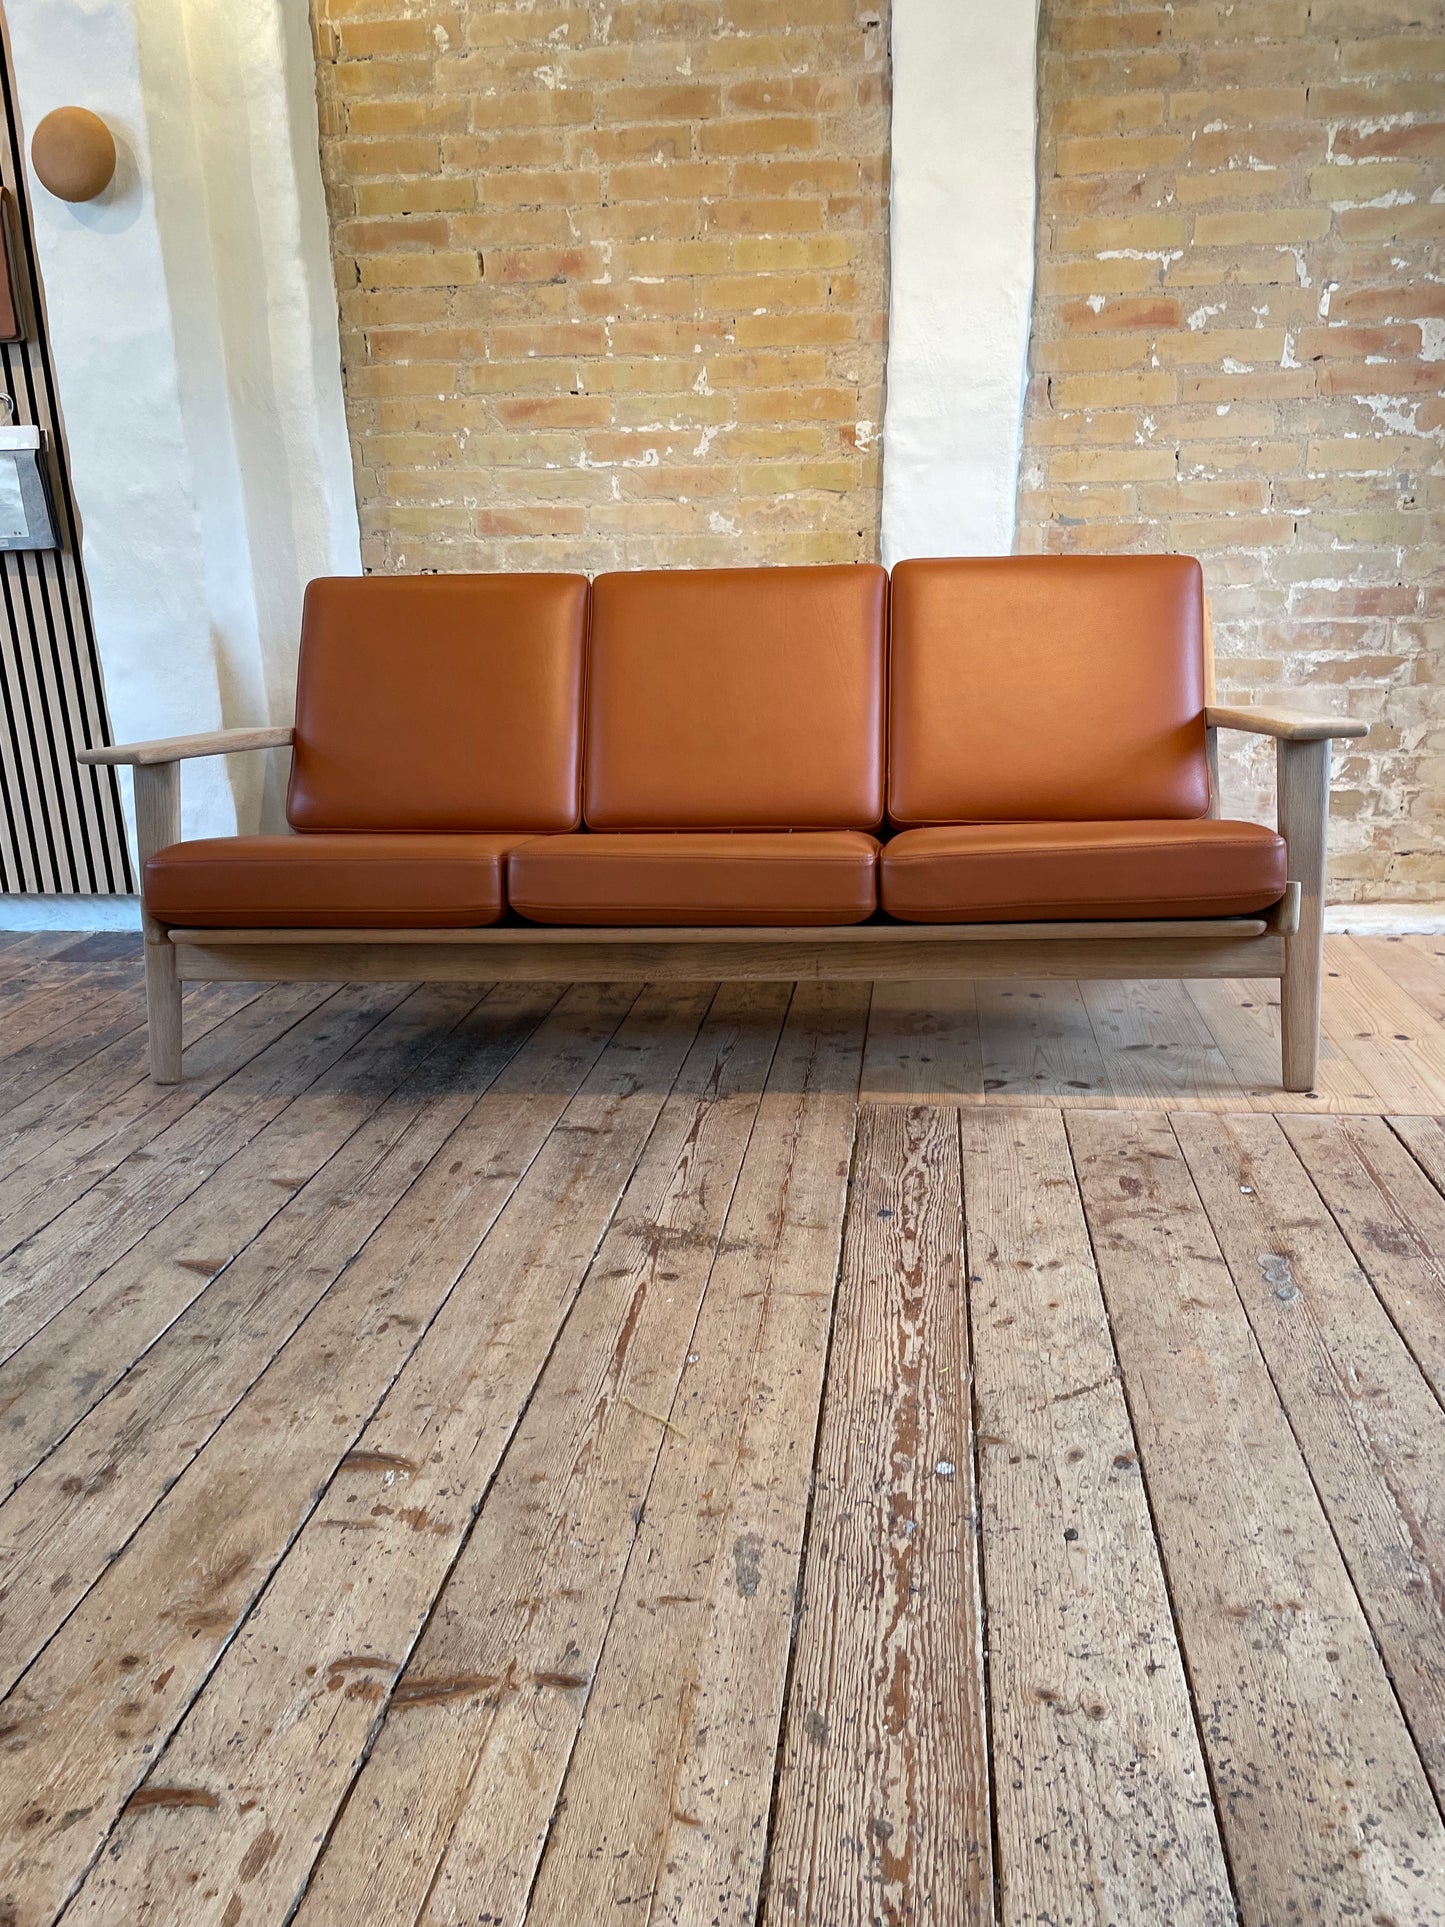 Cushion set for Wegner GE290 3-seater sofa in cognac-colored semi-aniline leather from CAMO